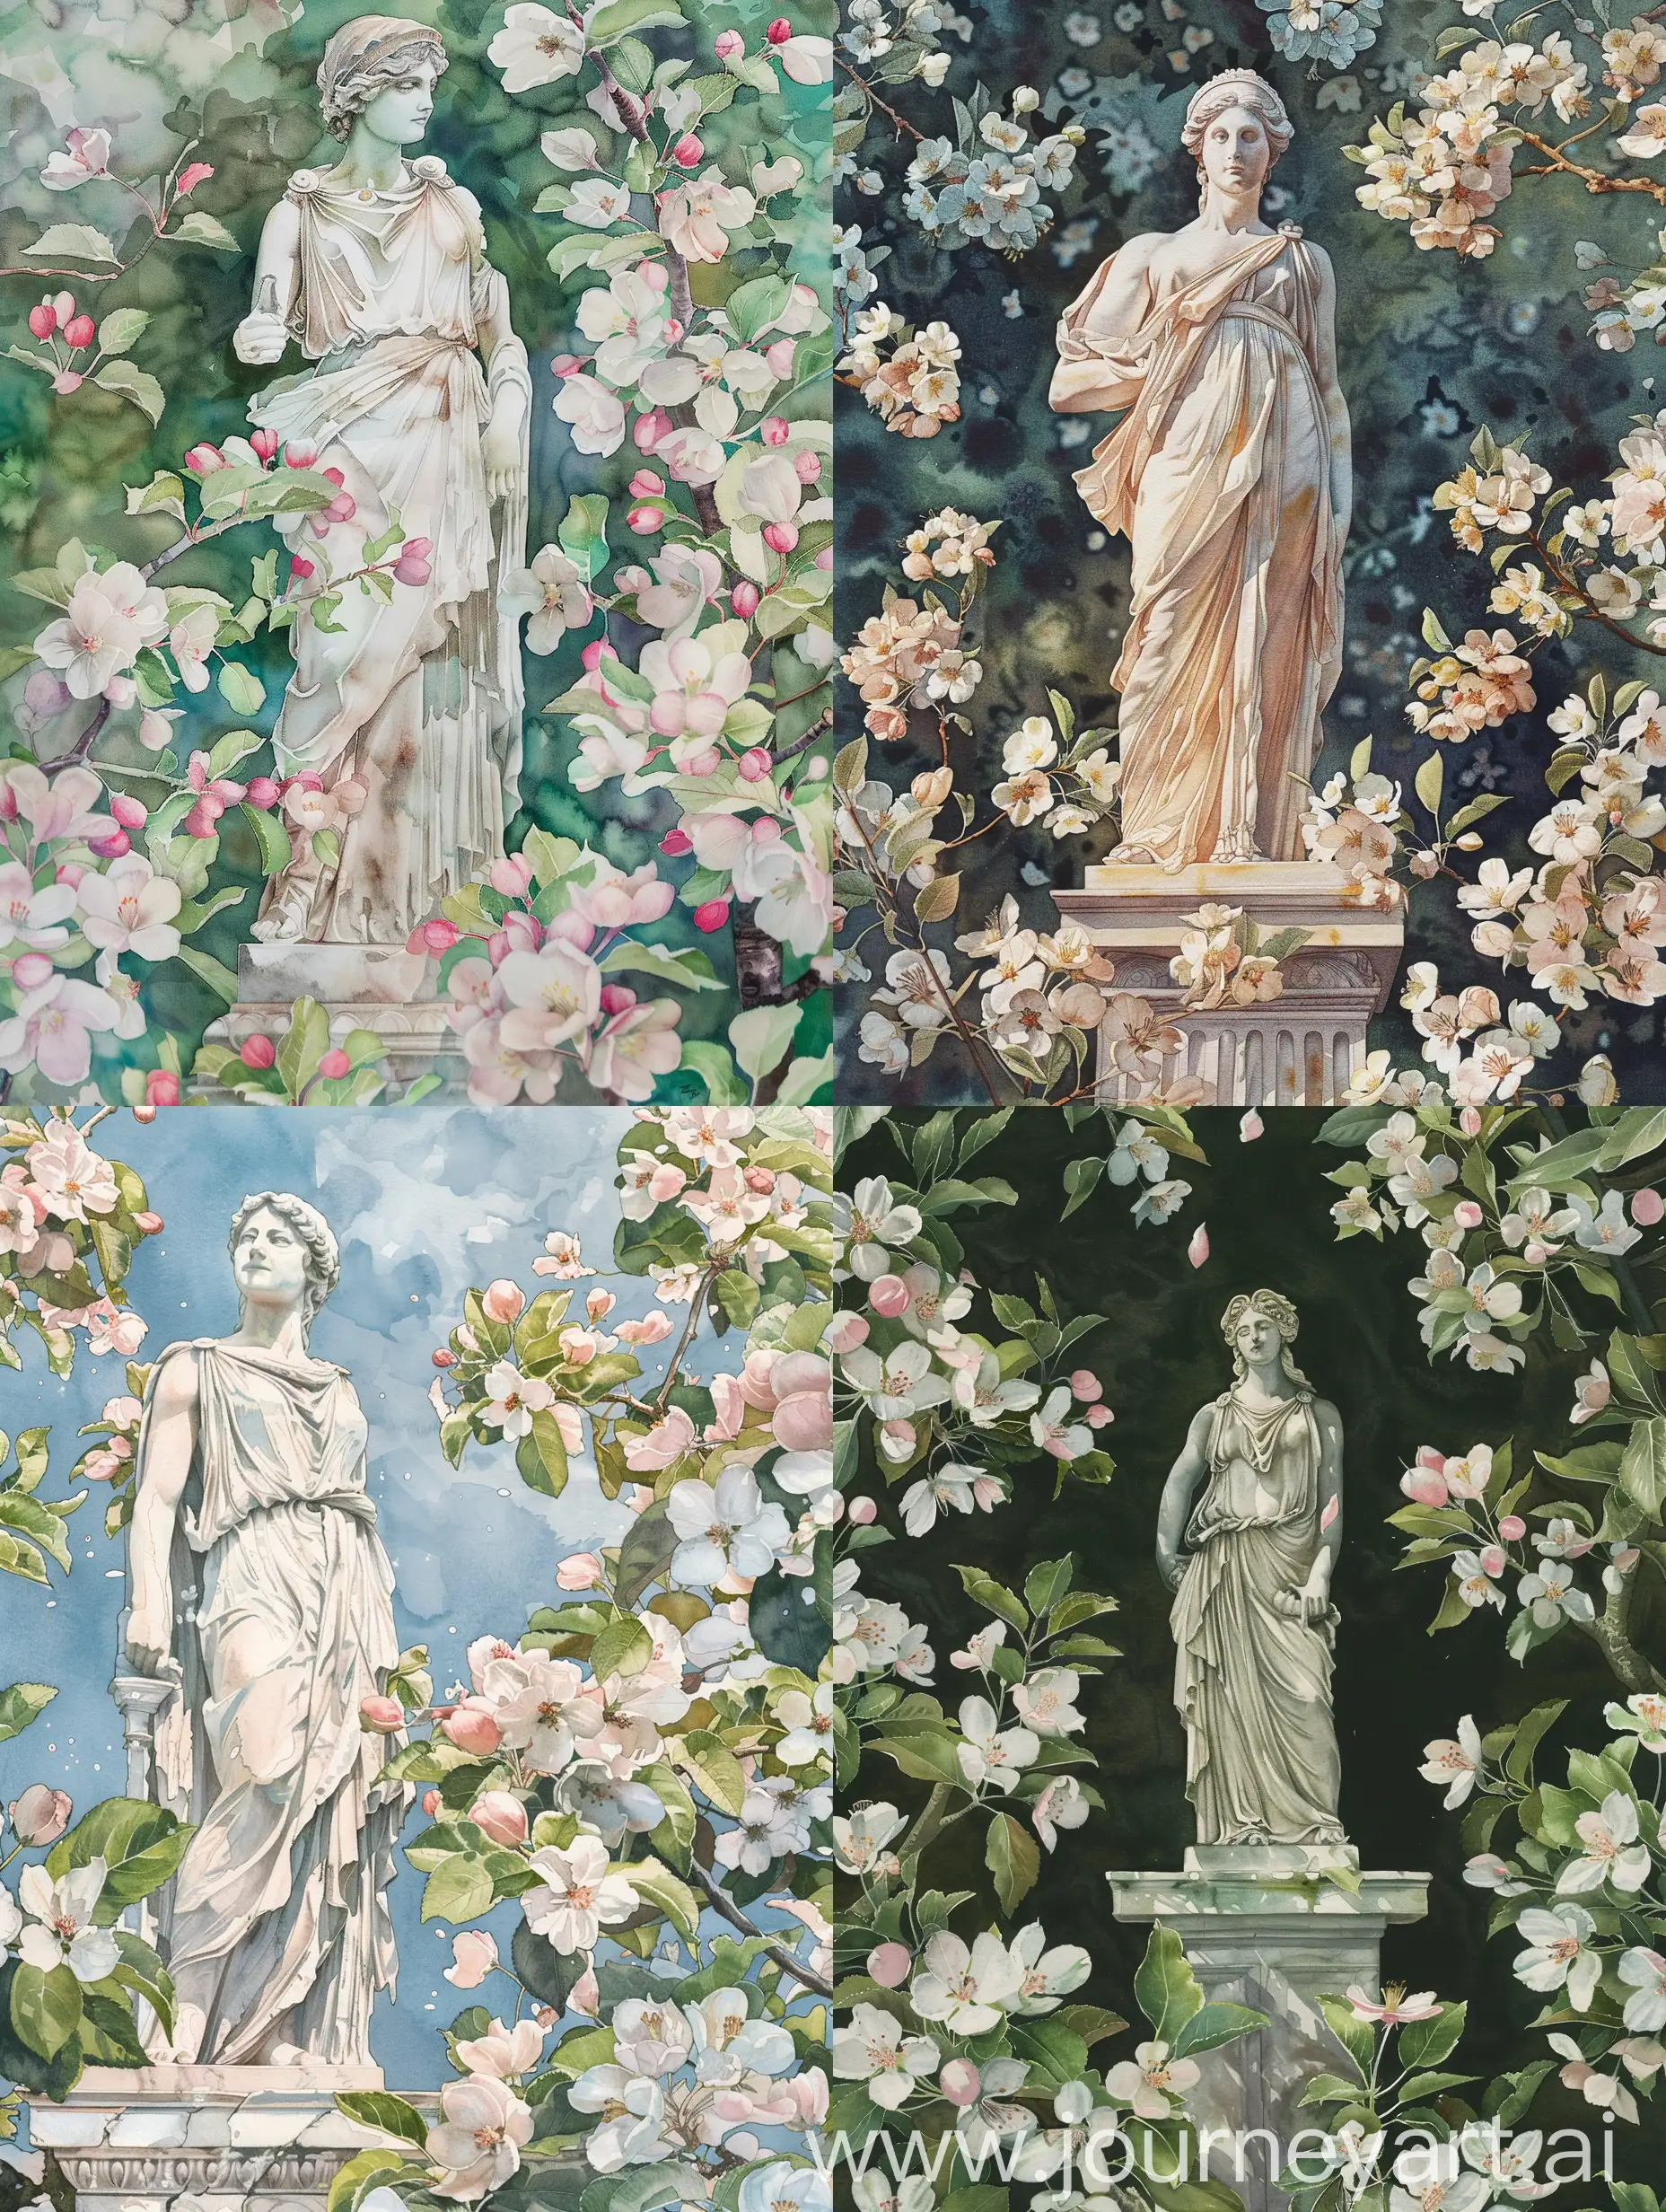 Antique-Themis-Statue-with-Apple-Blossoms-in-Watercolor-Style